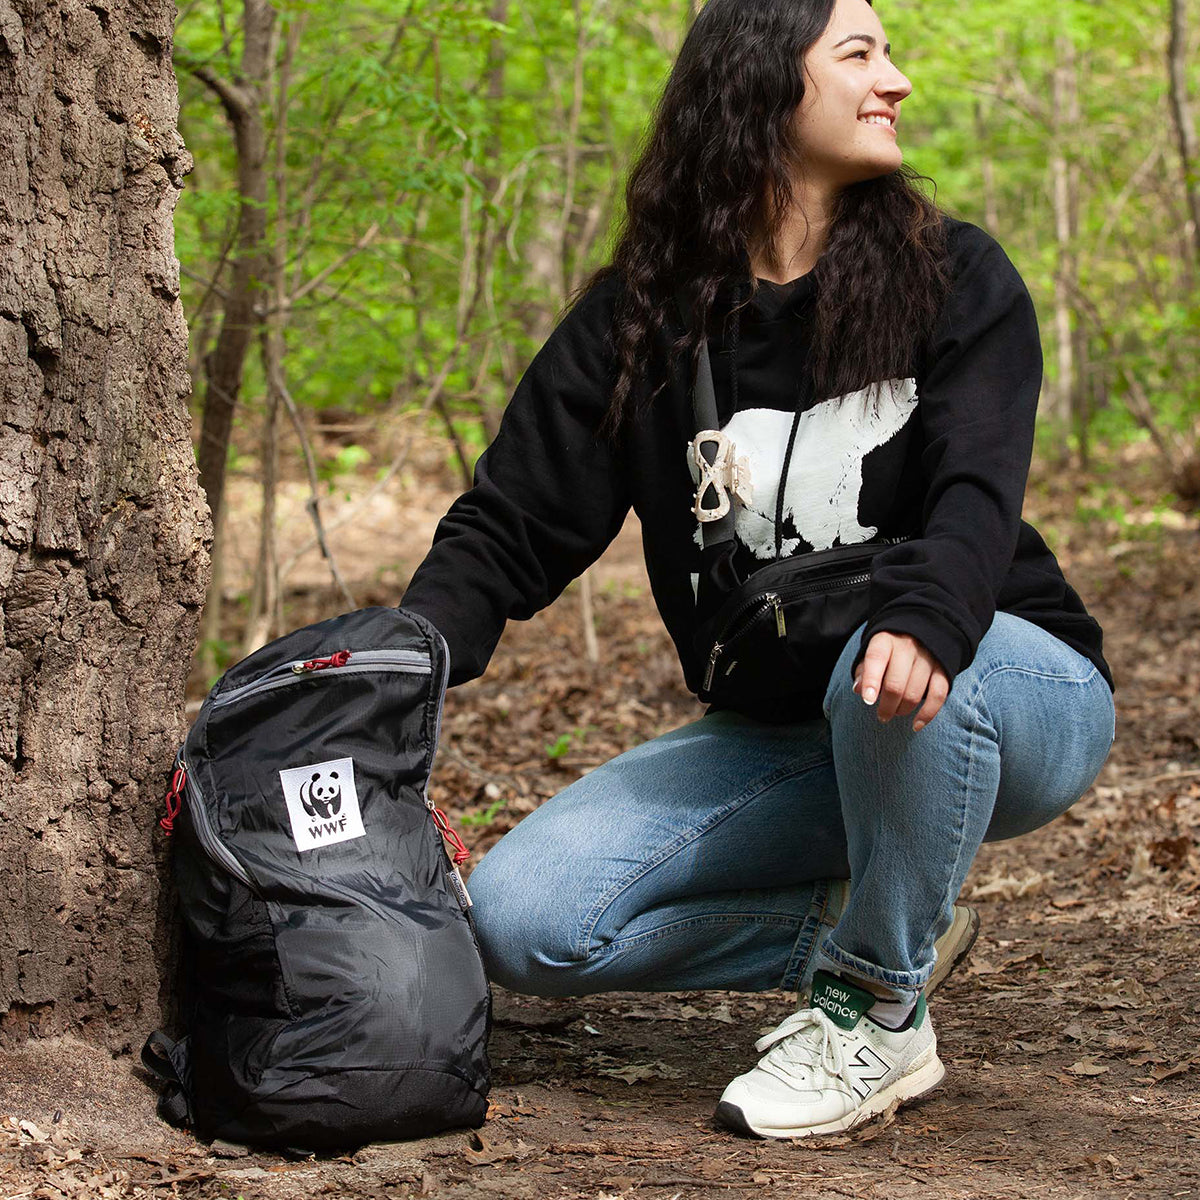 A photo of a woman crouching next to the ChicoBag travel backpack featuring the WWF logo